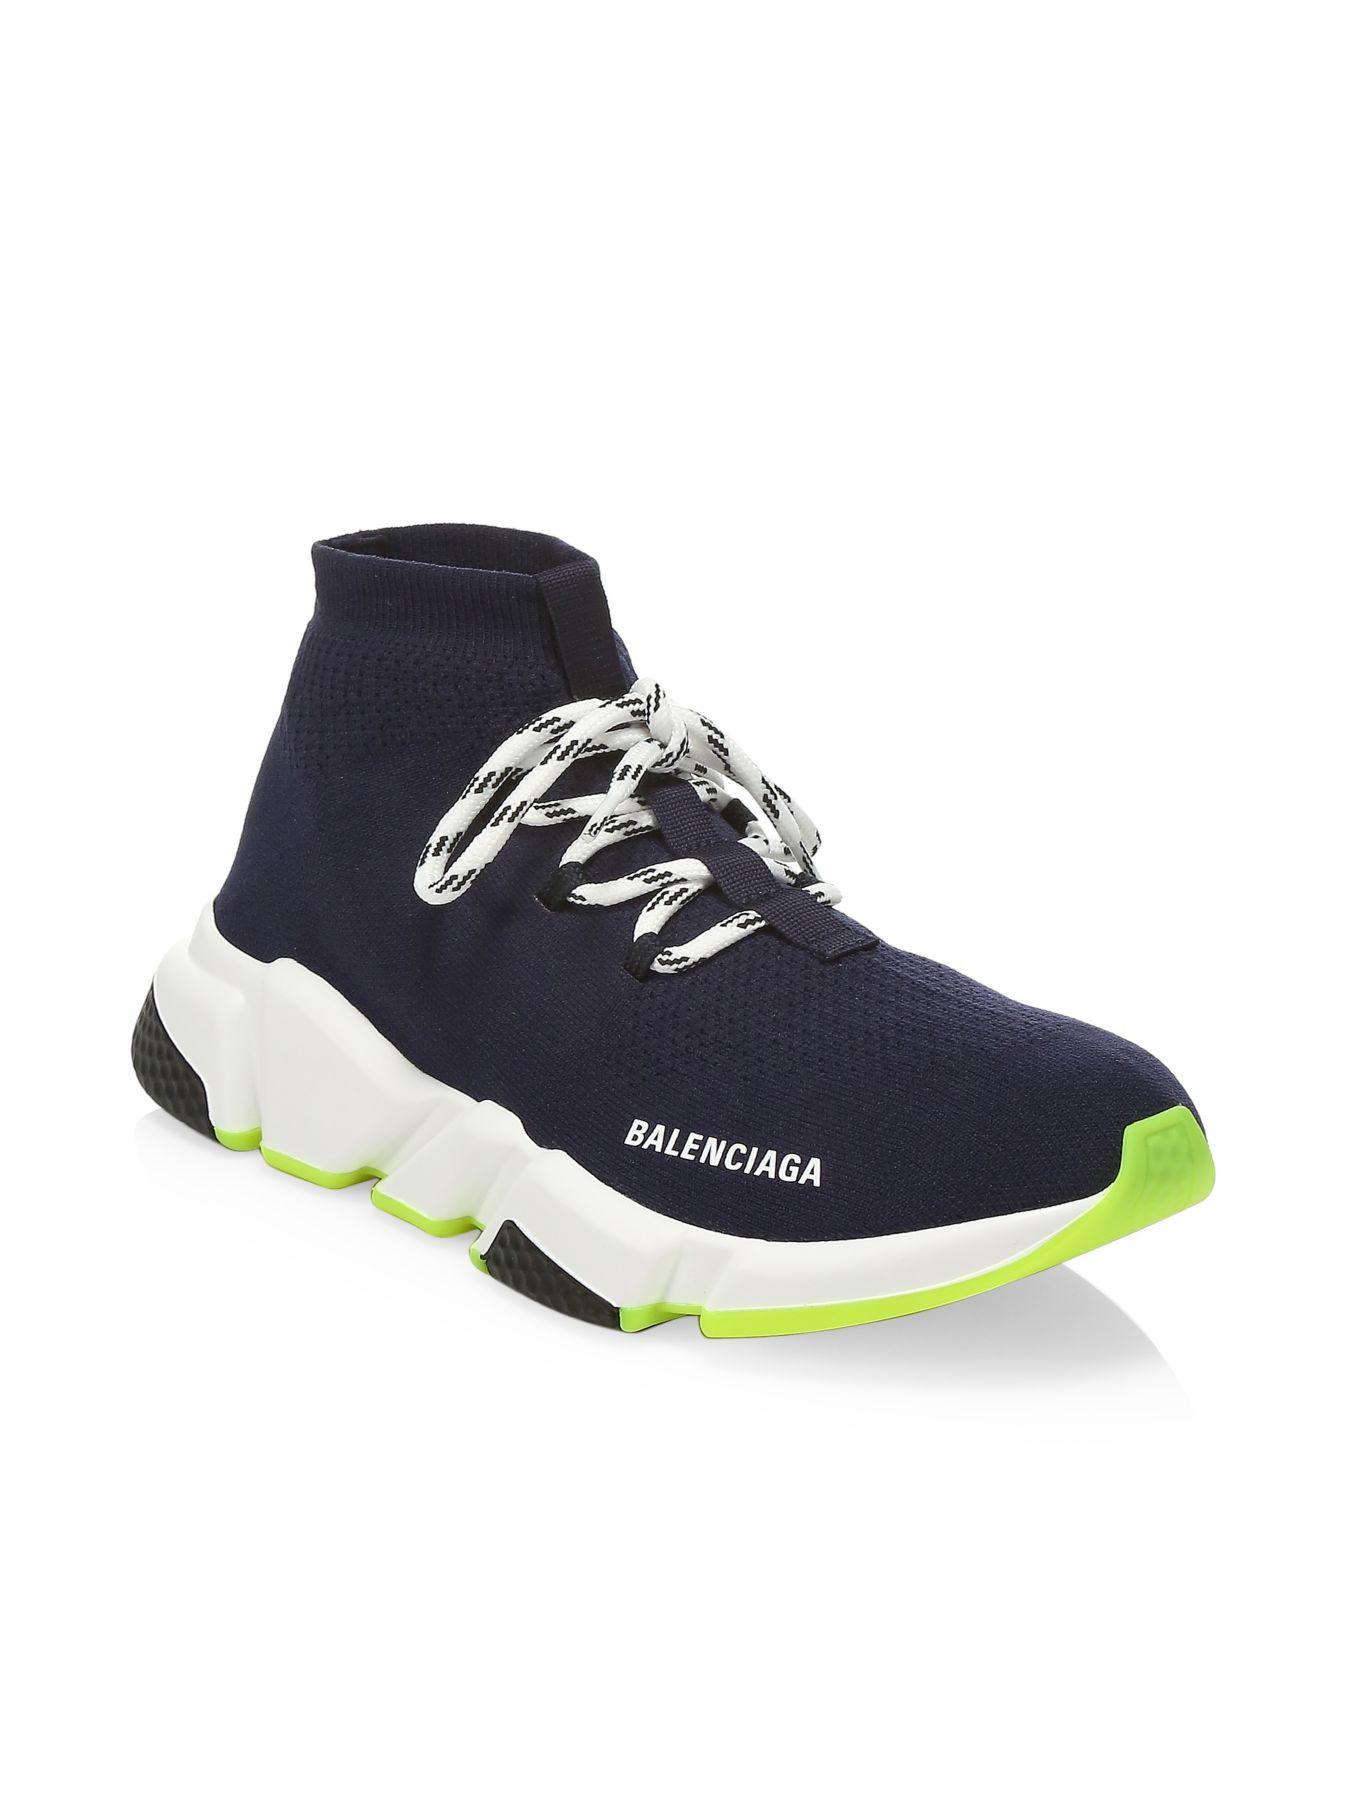 Balenciaga Synthetic Speed Lace-up Sneakers in Navy (Blue) - Lyst